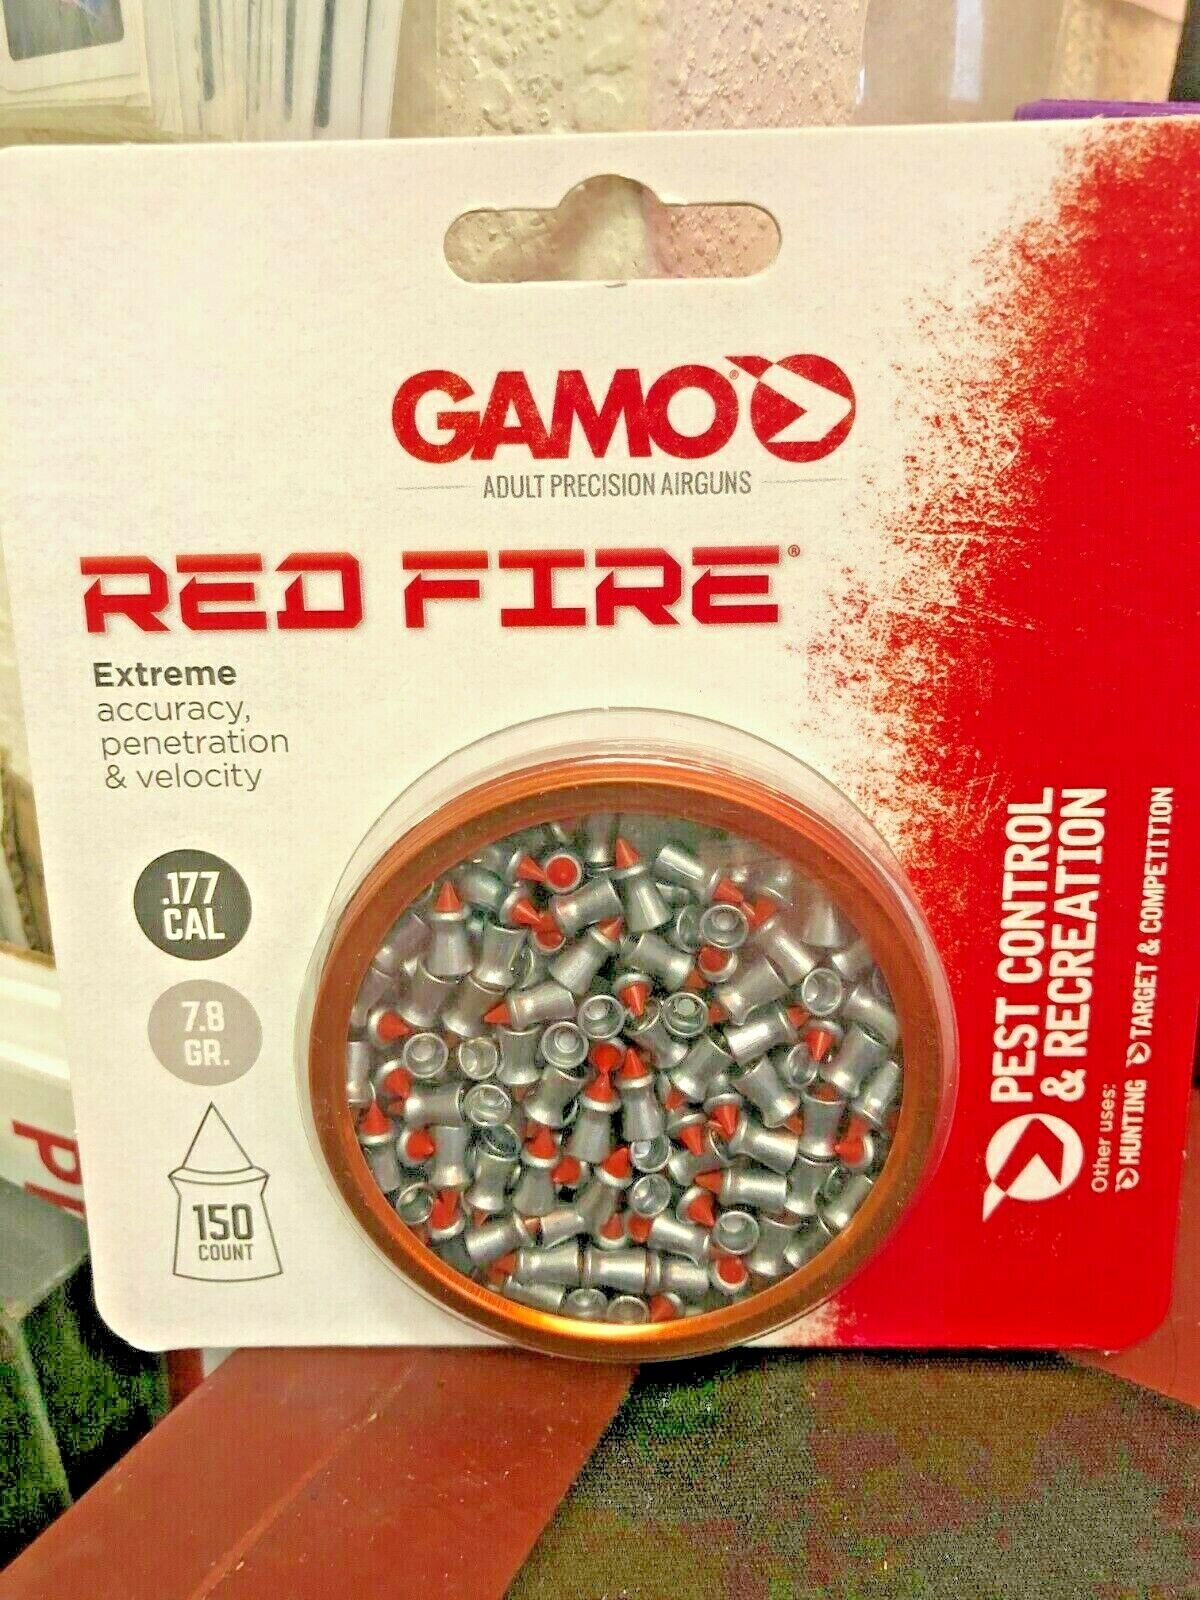 GAMO, Adult Precison Airguns, RED FIRE, .177 Cal., 150 Count, Extreme Accuracy